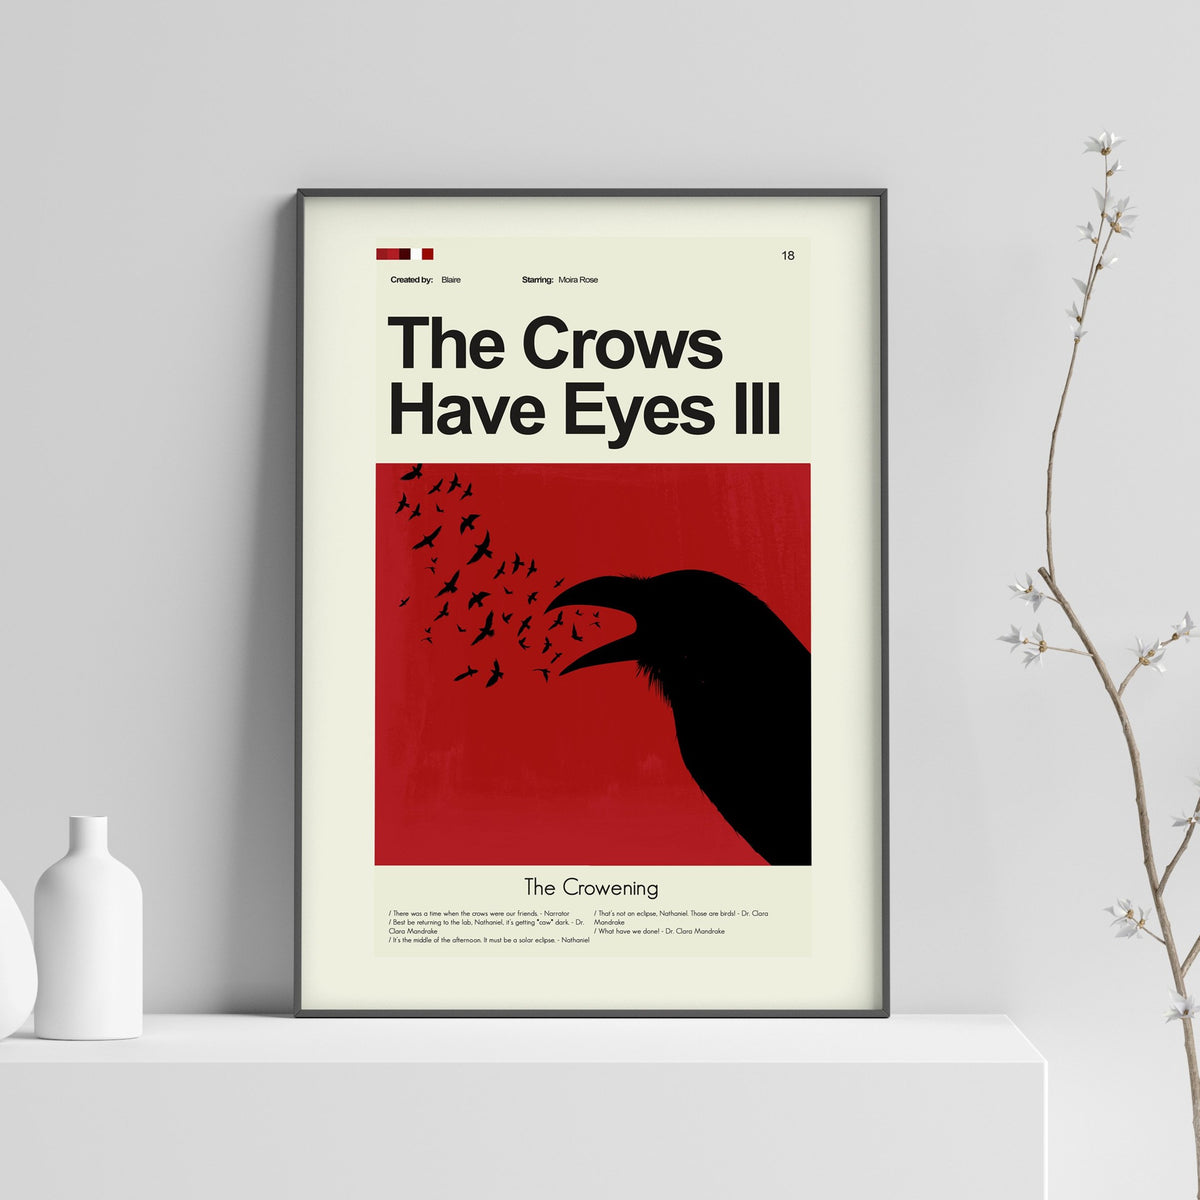 The Crows Have Eyes III: The Crowening - Schitt's Creek | 12"x18" or 18"x24" Print only